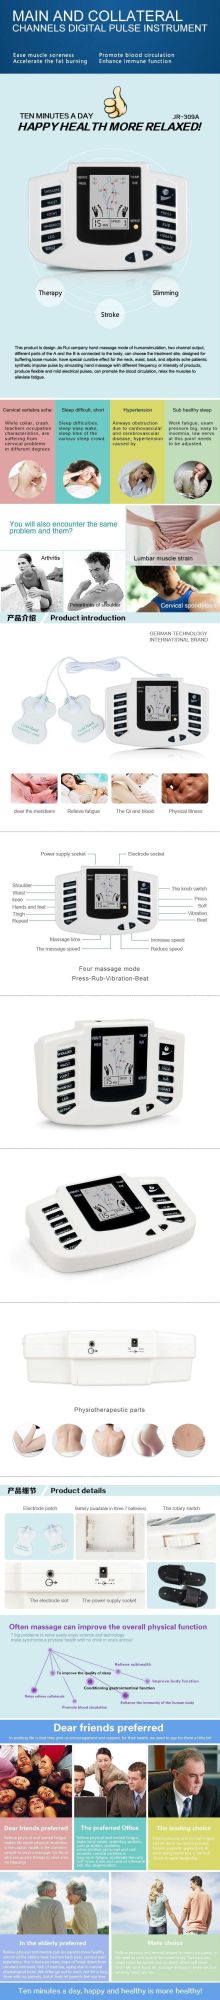 Electric Muscle Percussion Body Massage Gun Fascia Gun 22 Speeds with 8 Heads and LCD Display